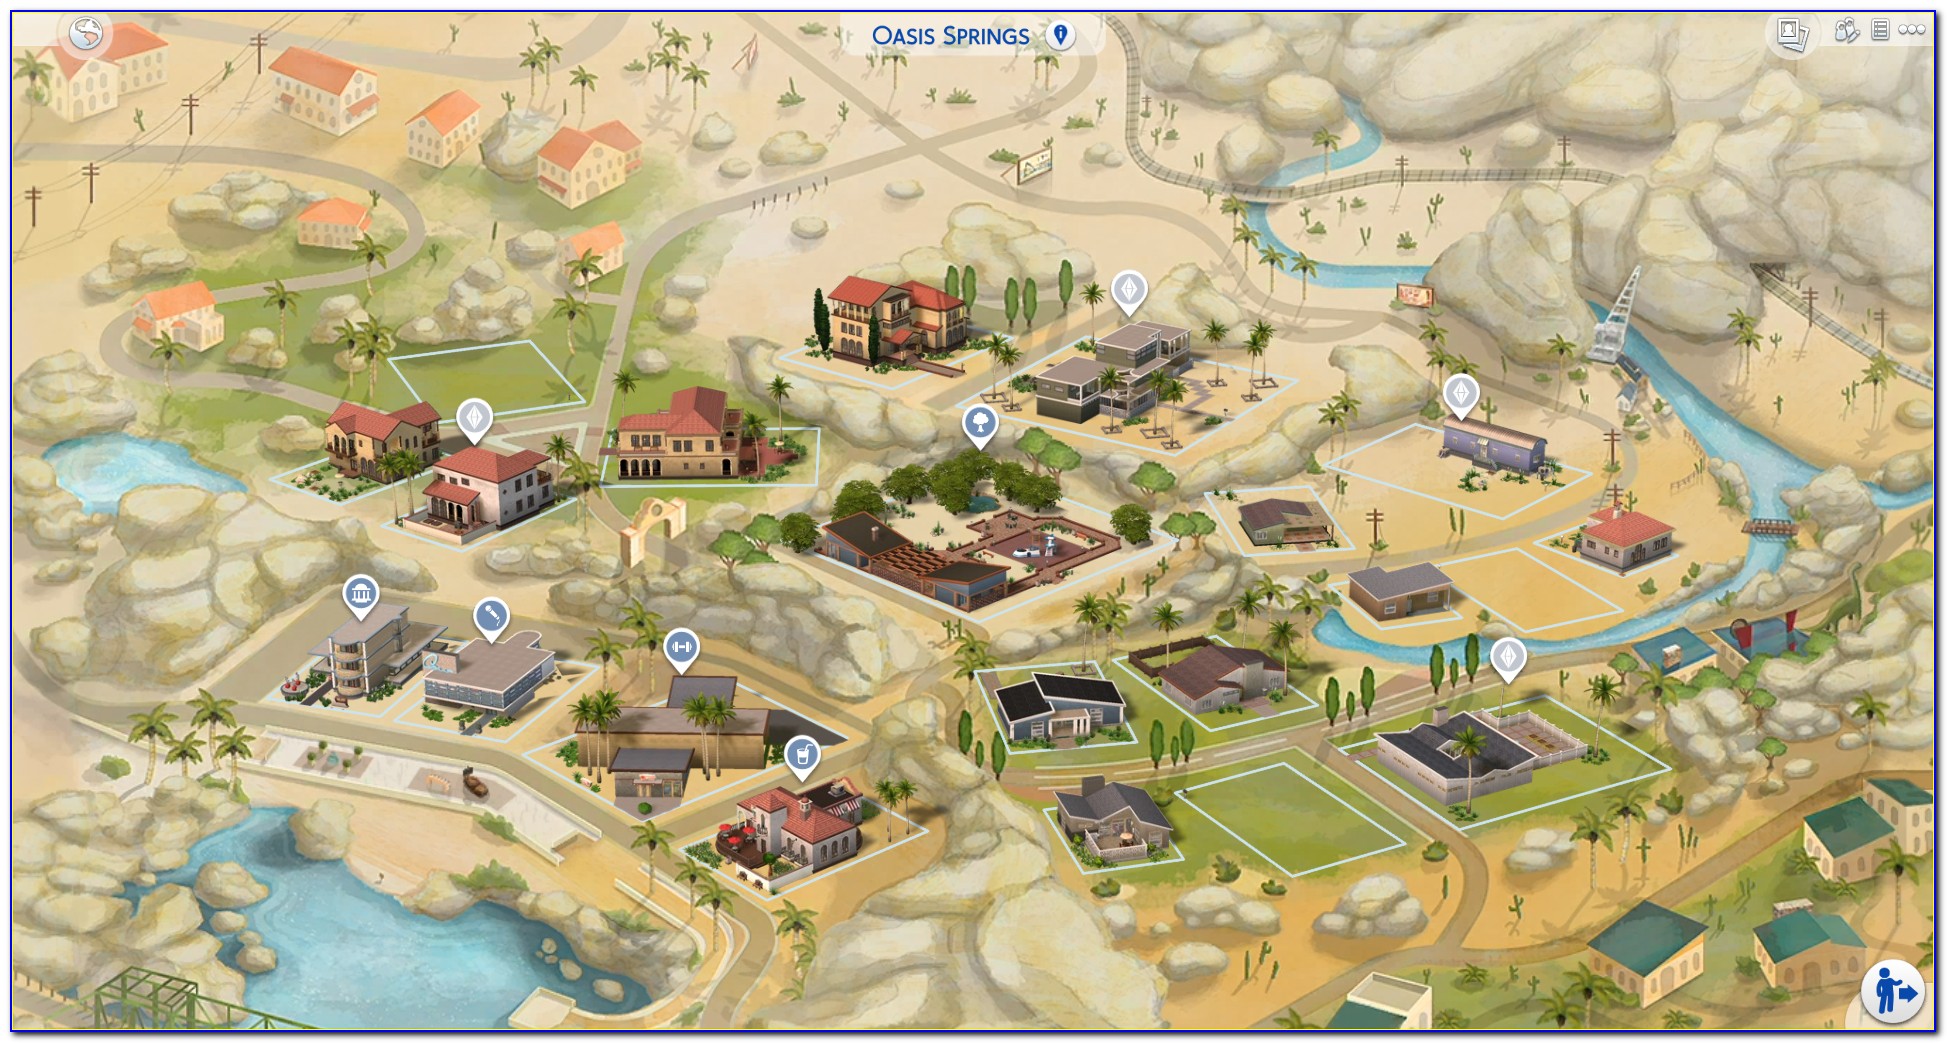 Sims 4 Map Of All Worlds